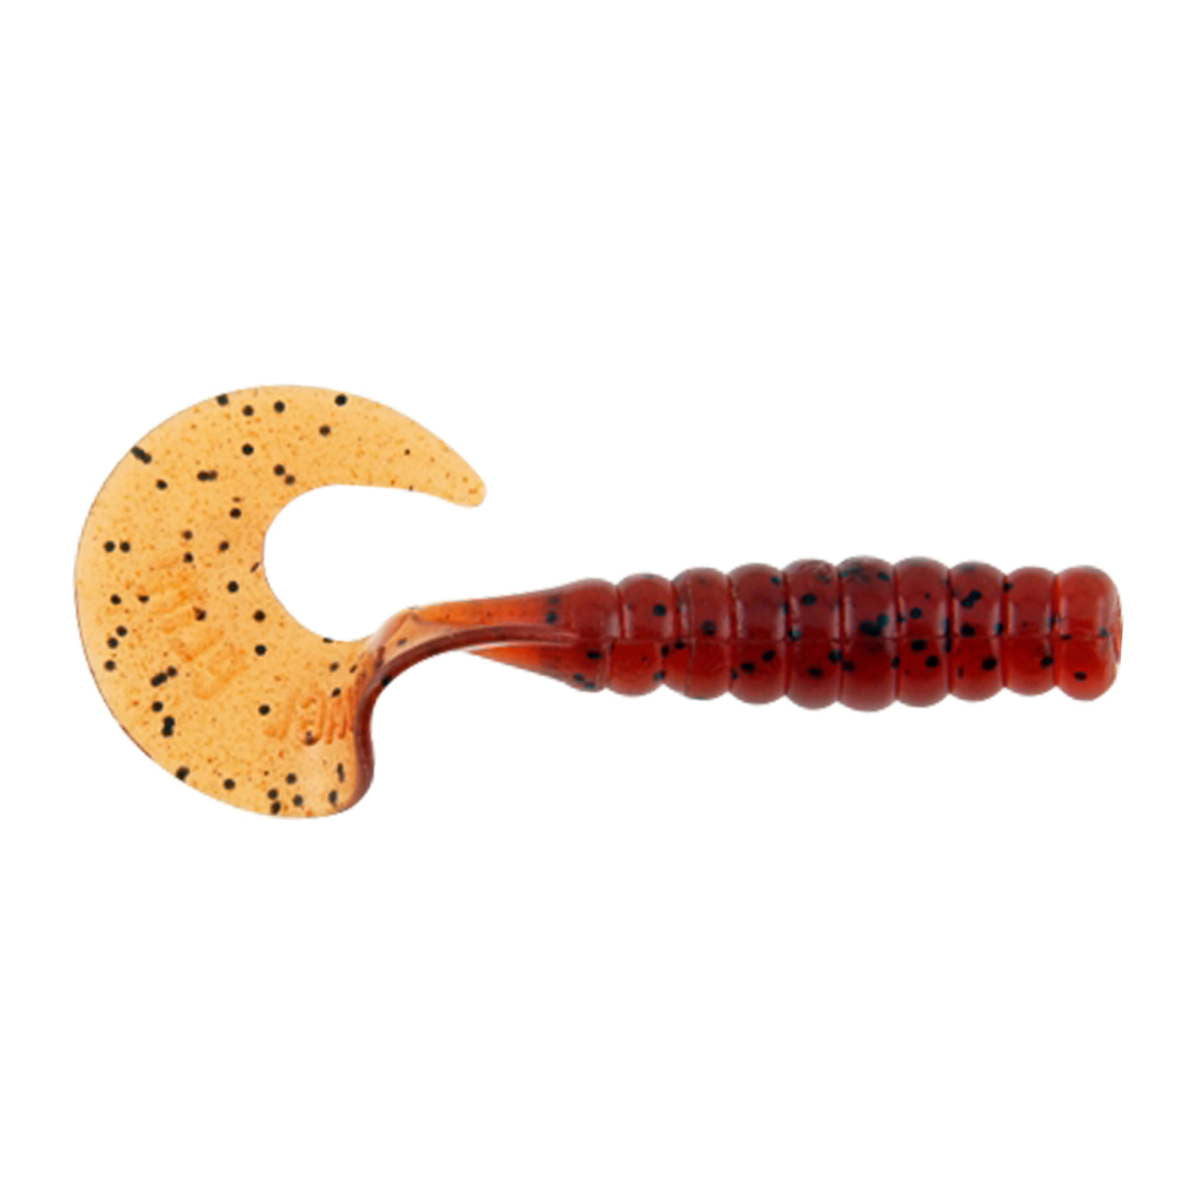 Photo of Berkley PowerBait Power Grubs for sale at United Tackle Shops.